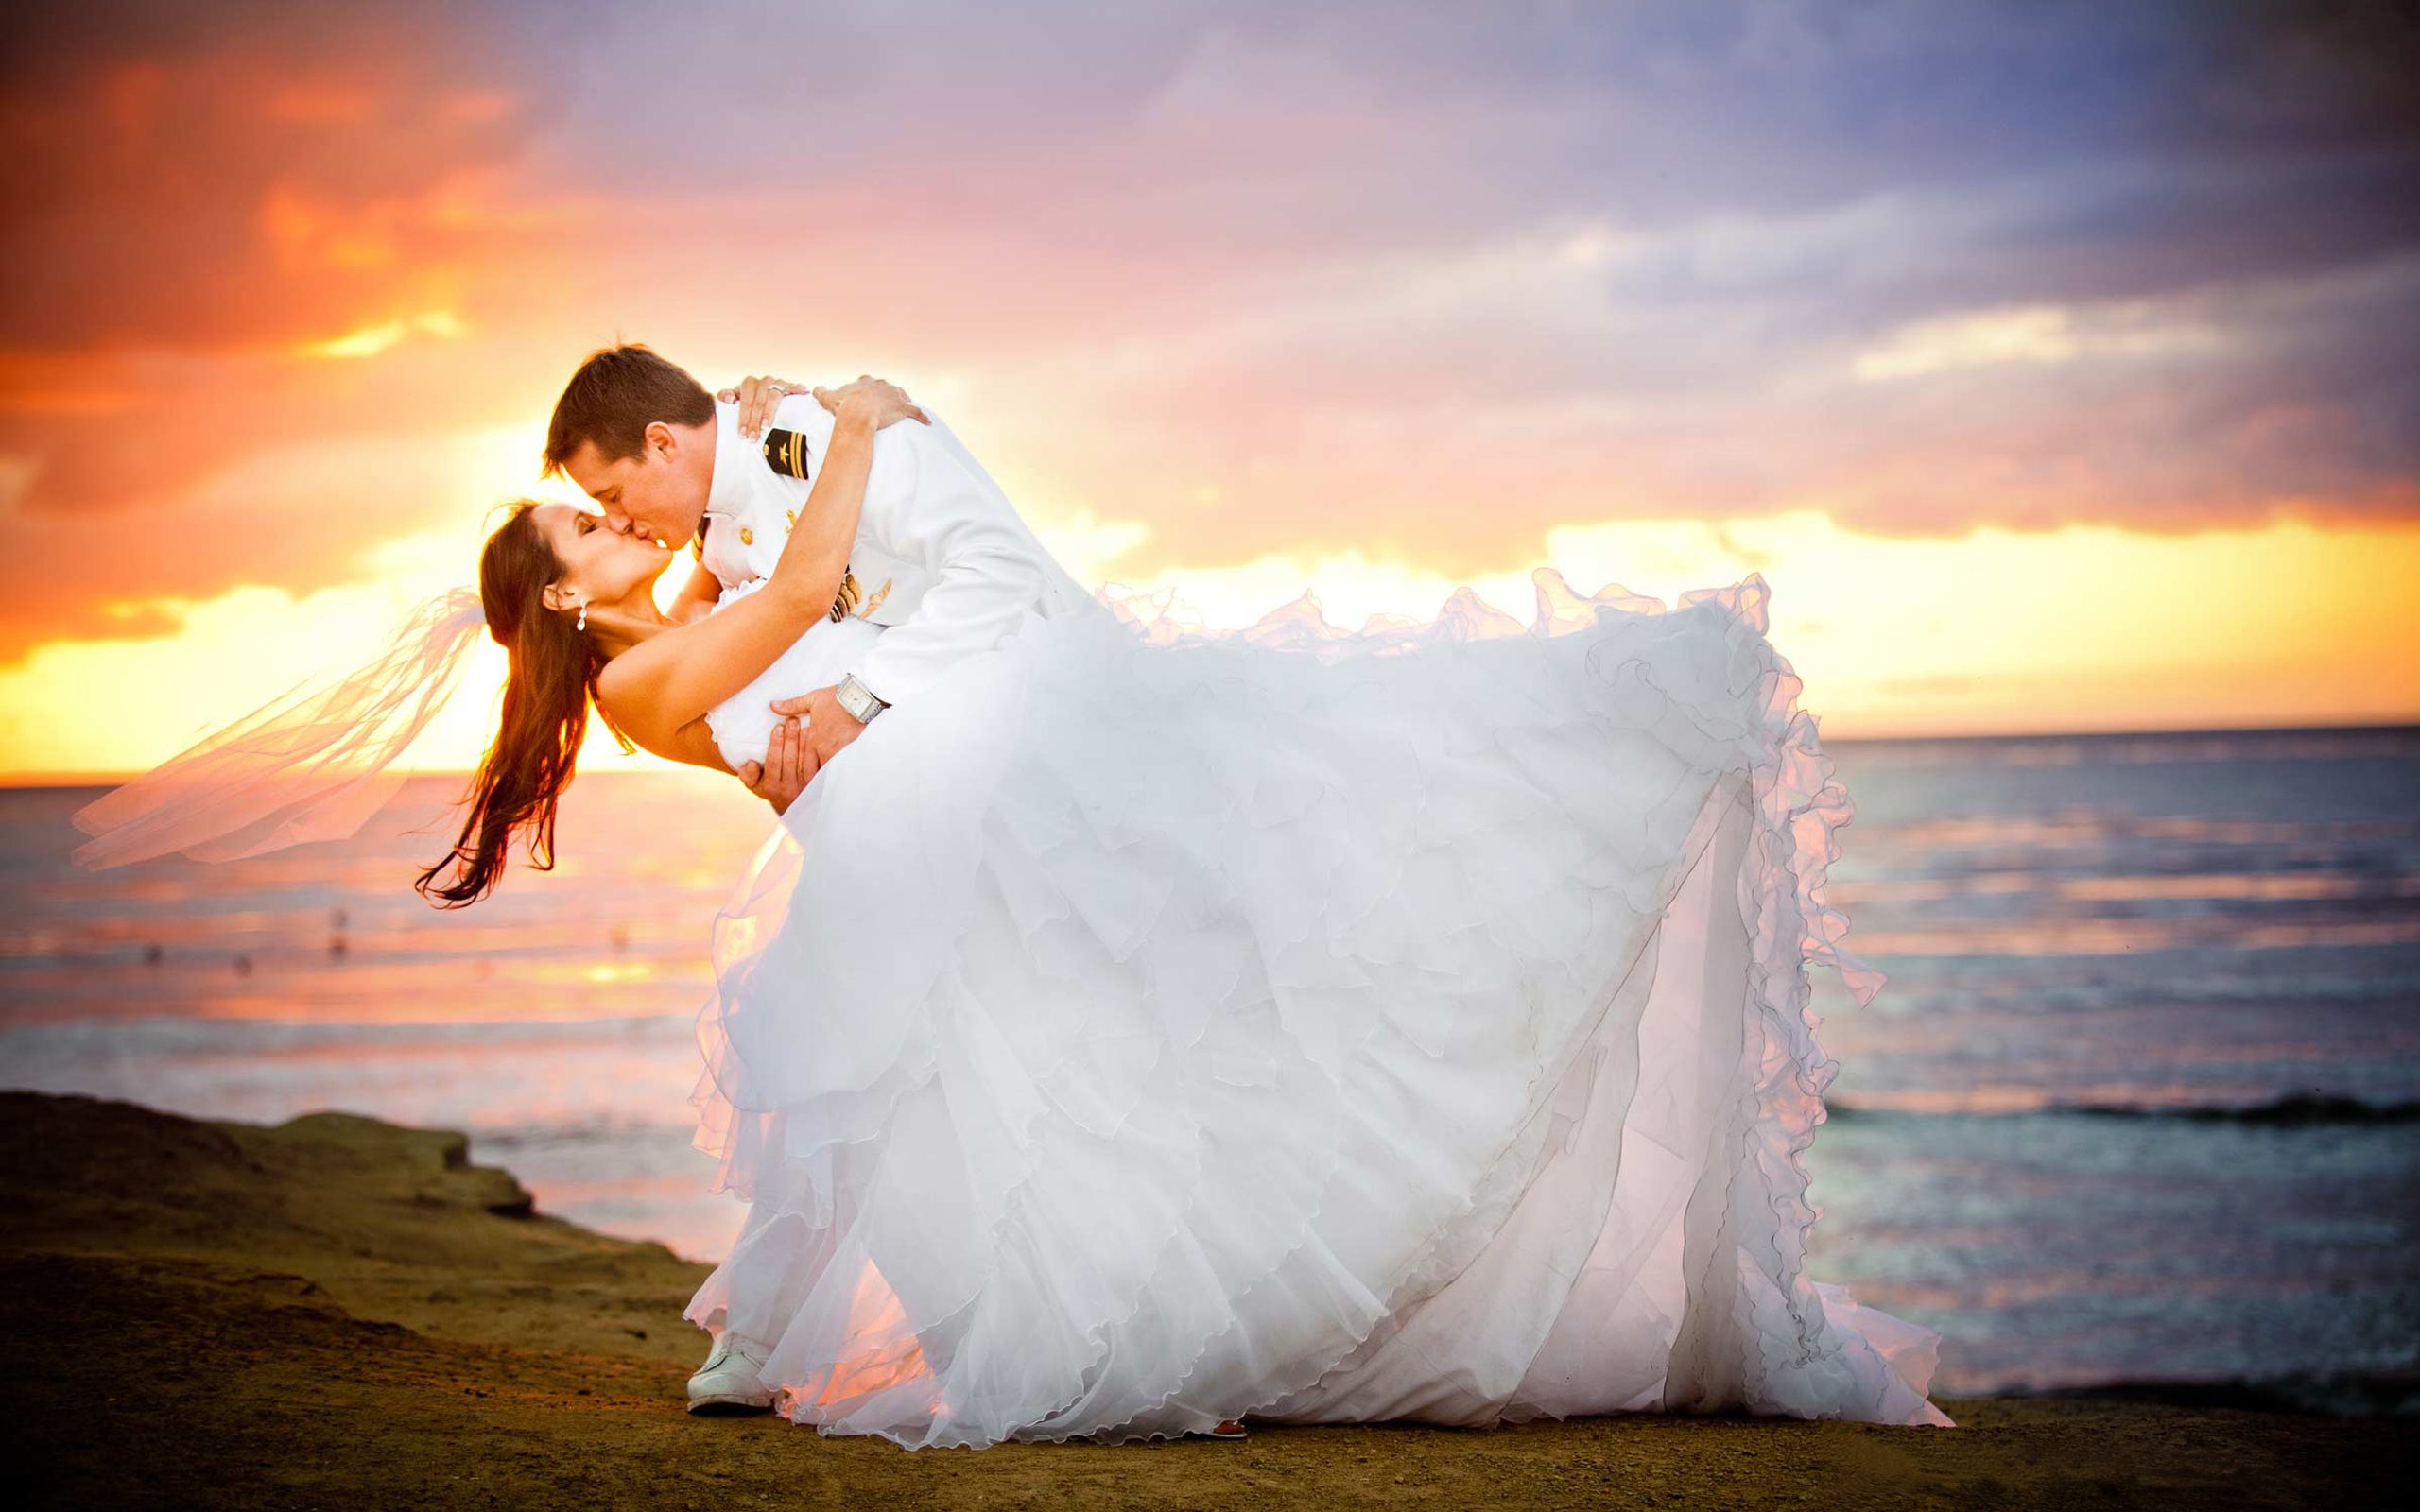 Just Married Loving Couple Bridal In Uniform Young Woman In Wedding Dress Sunset Beach Romantic Couple HD Wallpaper 2560x1600, Wallpaper13.com